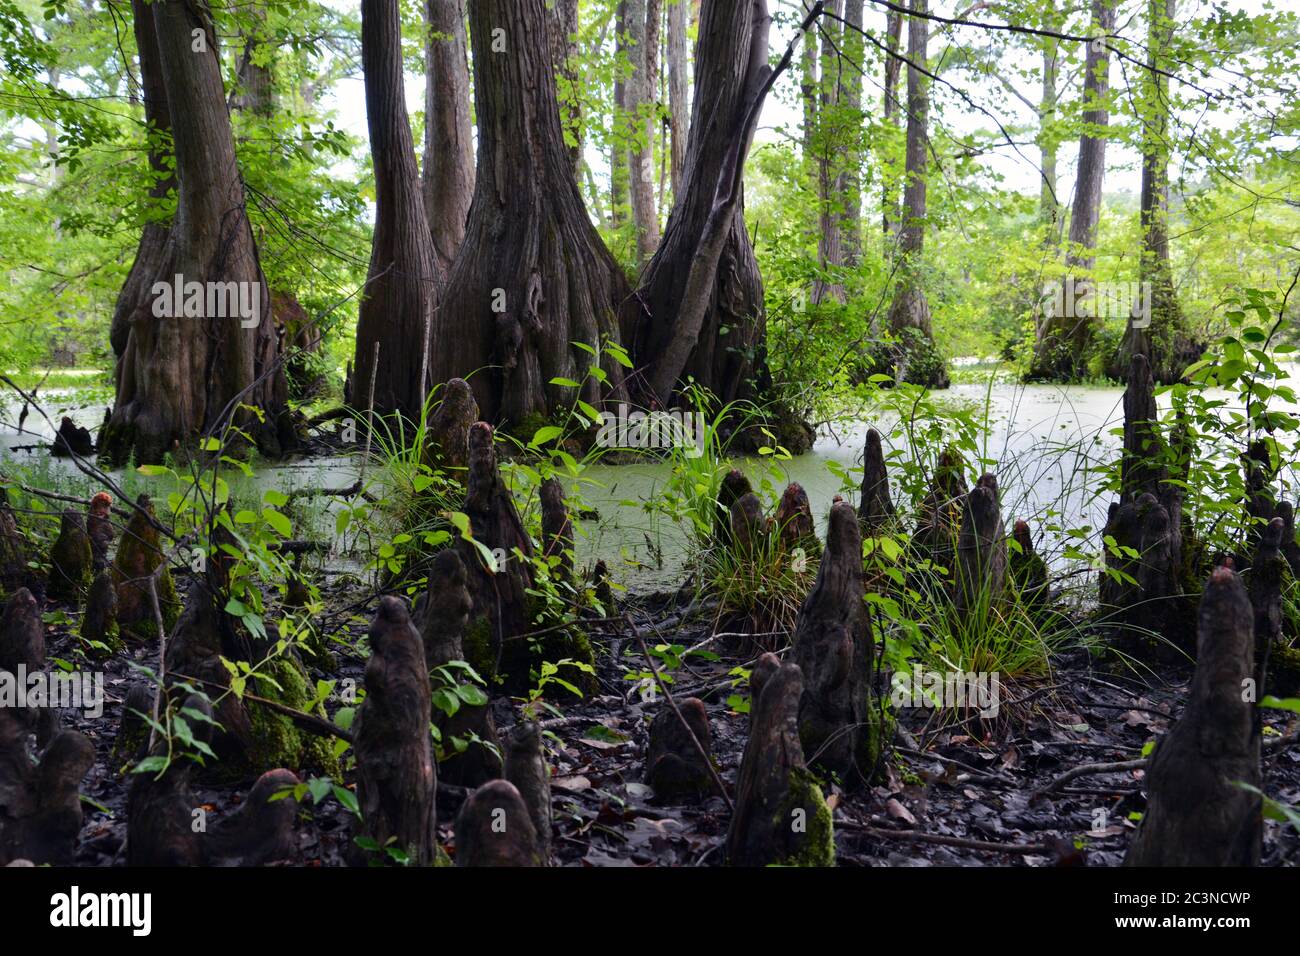 Stubby roots known as 'Cypress Knees' poke up out of the ground from the surrounding trees in the Merchants Millpond State Park in North Carolina. Stock Photo